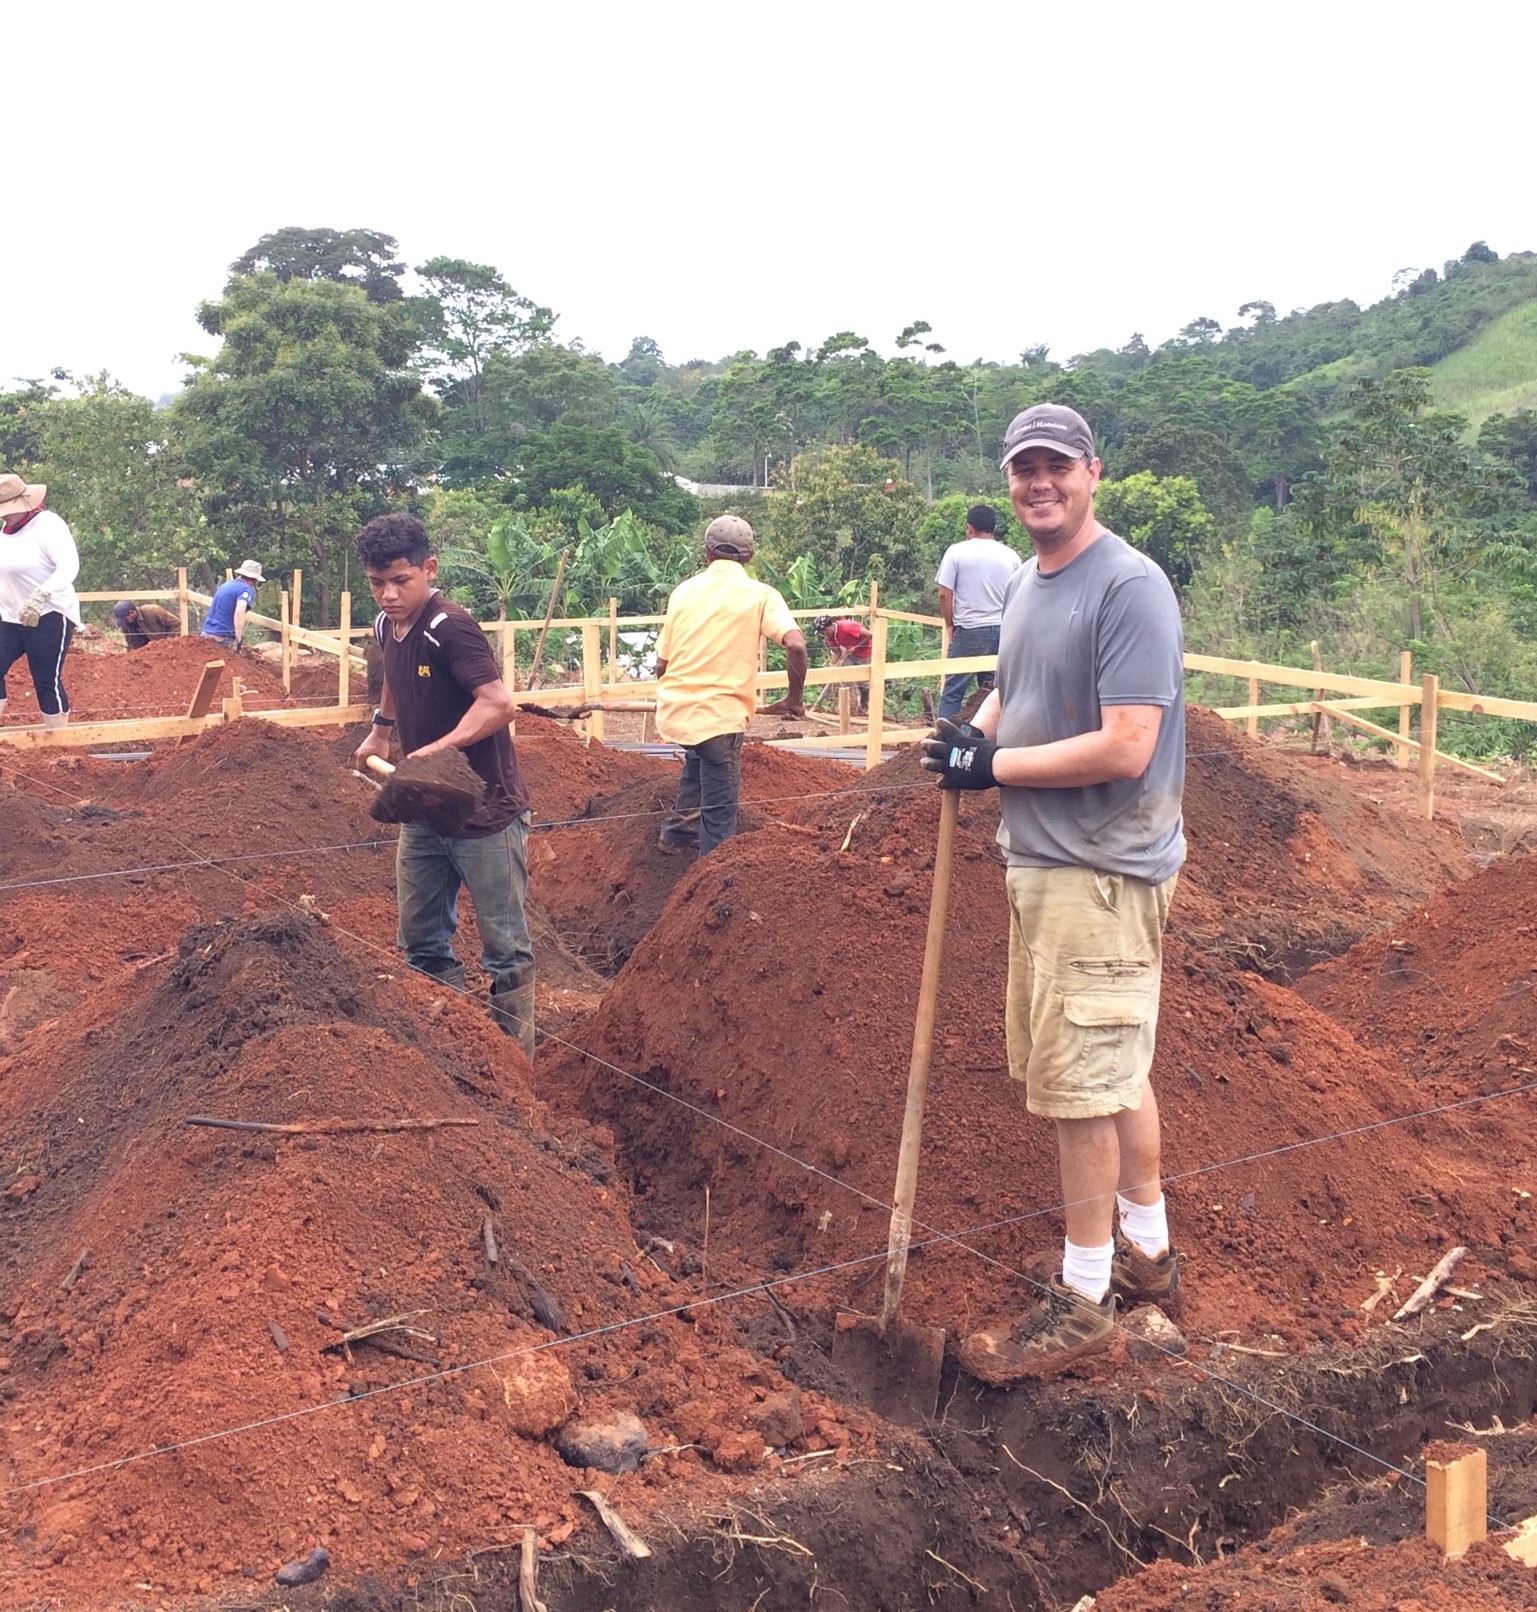 Rosen Hagood attorney Chip Bruorton has traveled to Honduras six times to volunteer with Habitat for Humanity to build homes on a parcel of land purchased by Bruorton’s church.